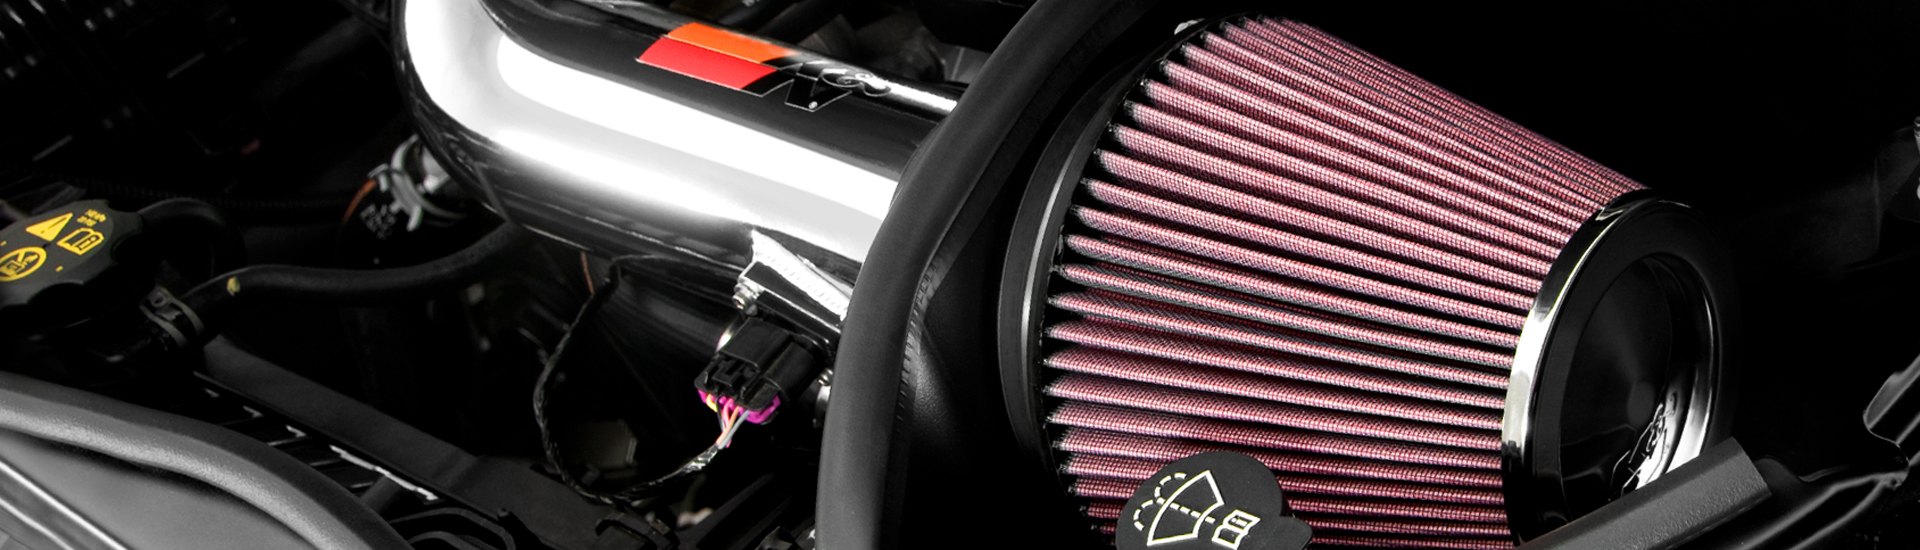 UNIVERSAL PERFORMANCE CAR AIR FILTER HIGH FLOW OPEN CONE INDUCTION INTAKE DOD